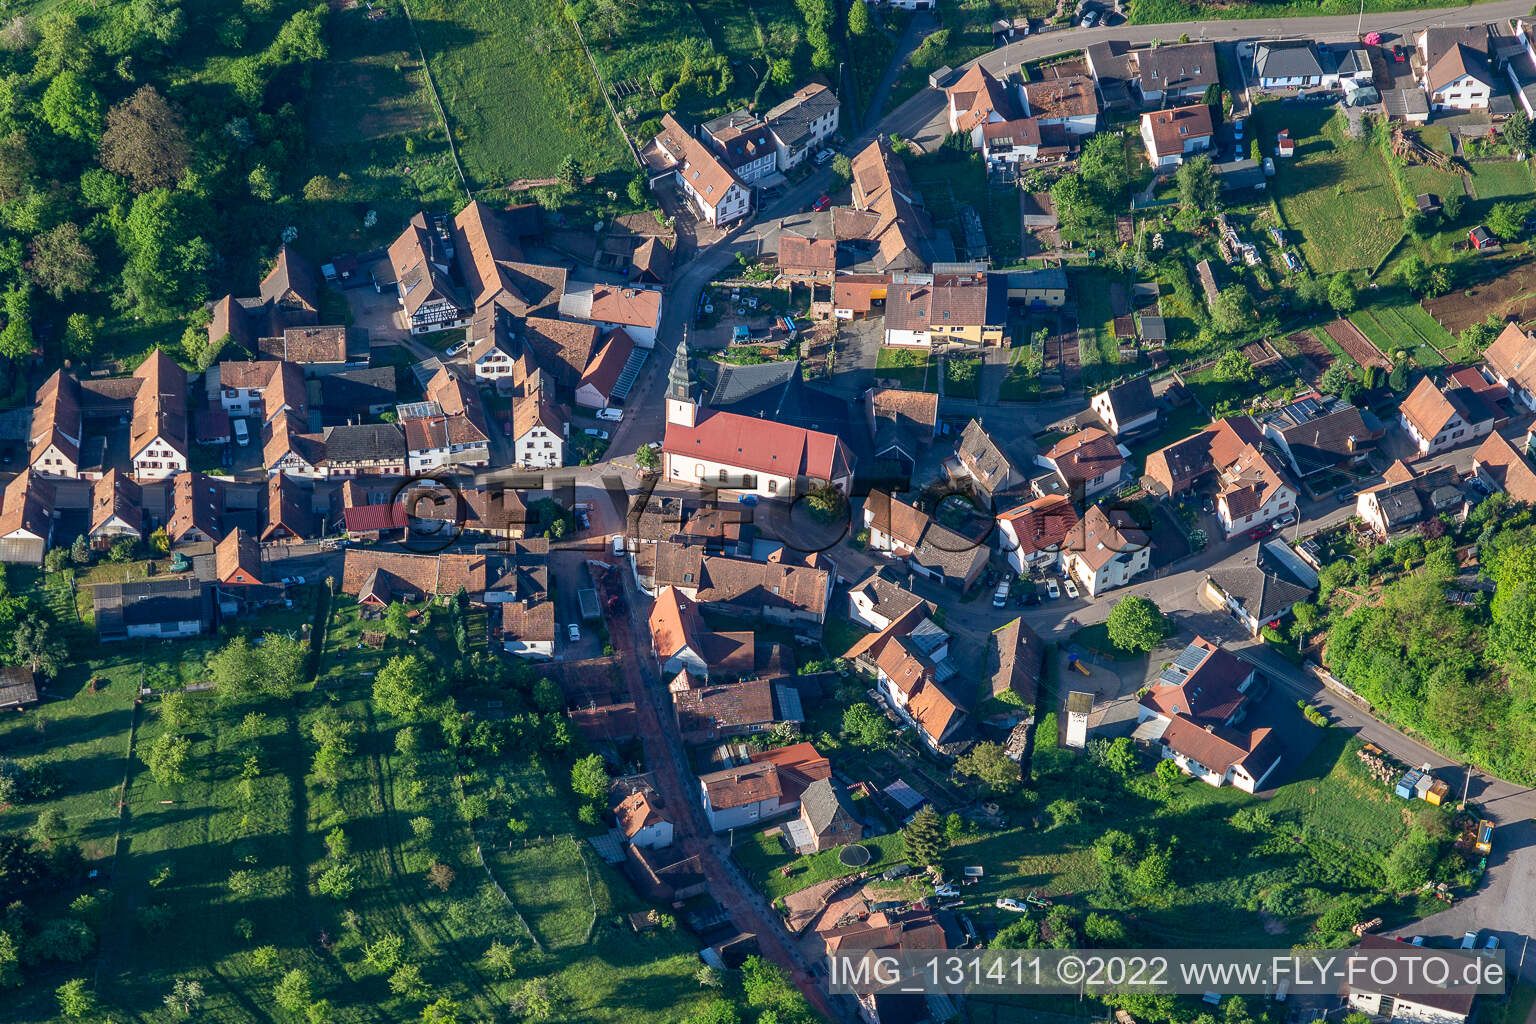 Drone image of Schwanheim in the state Rhineland-Palatinate, Germany